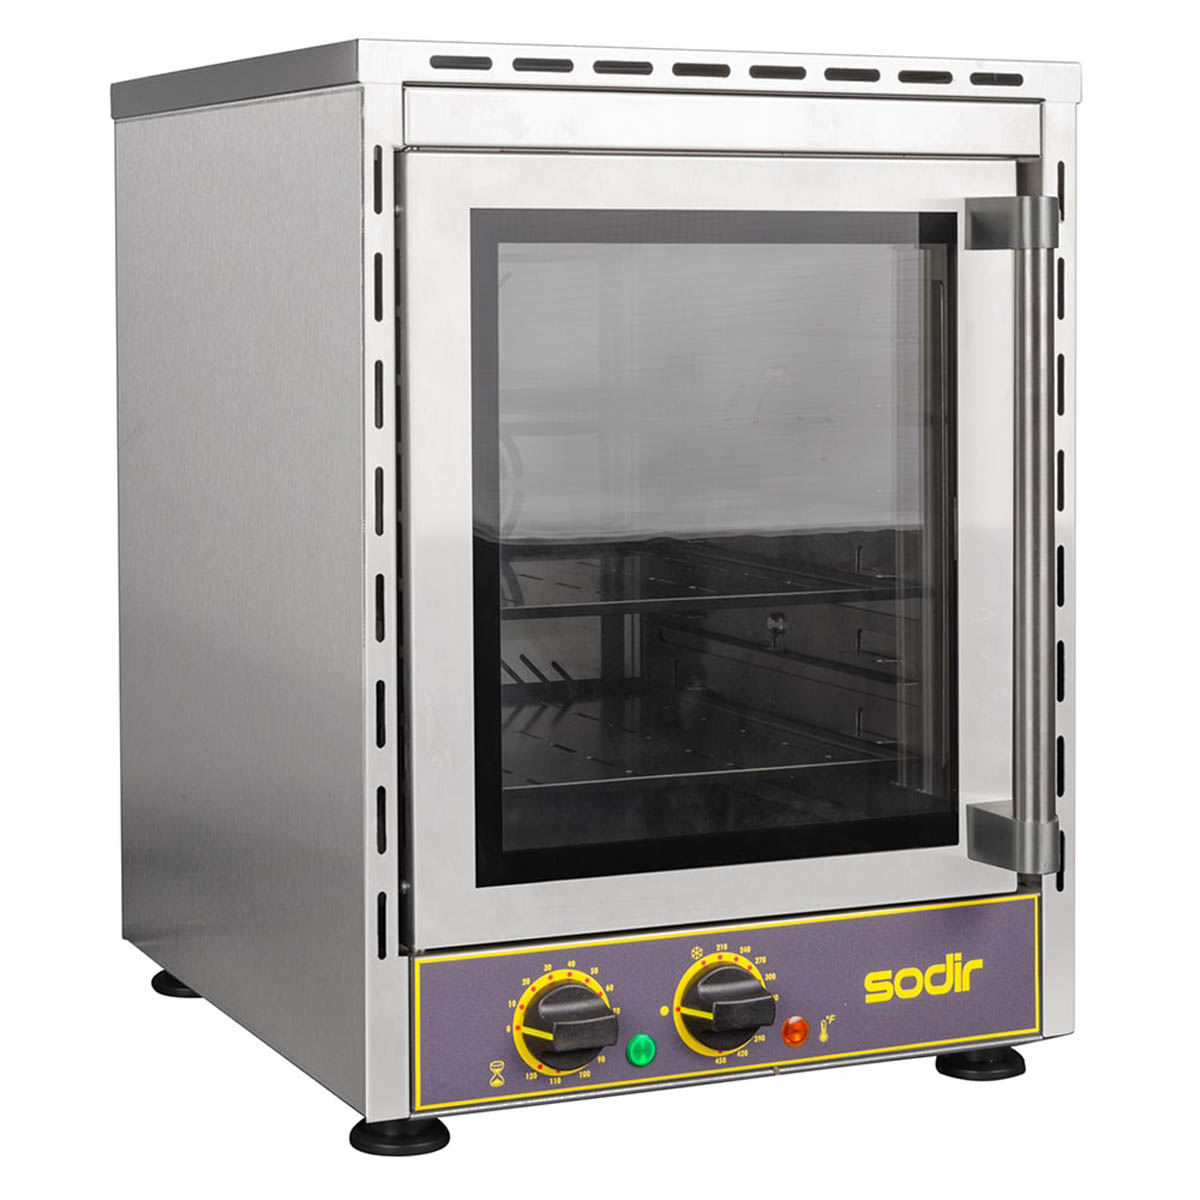 Equipex FC-280V/1 Electric Convection Oven